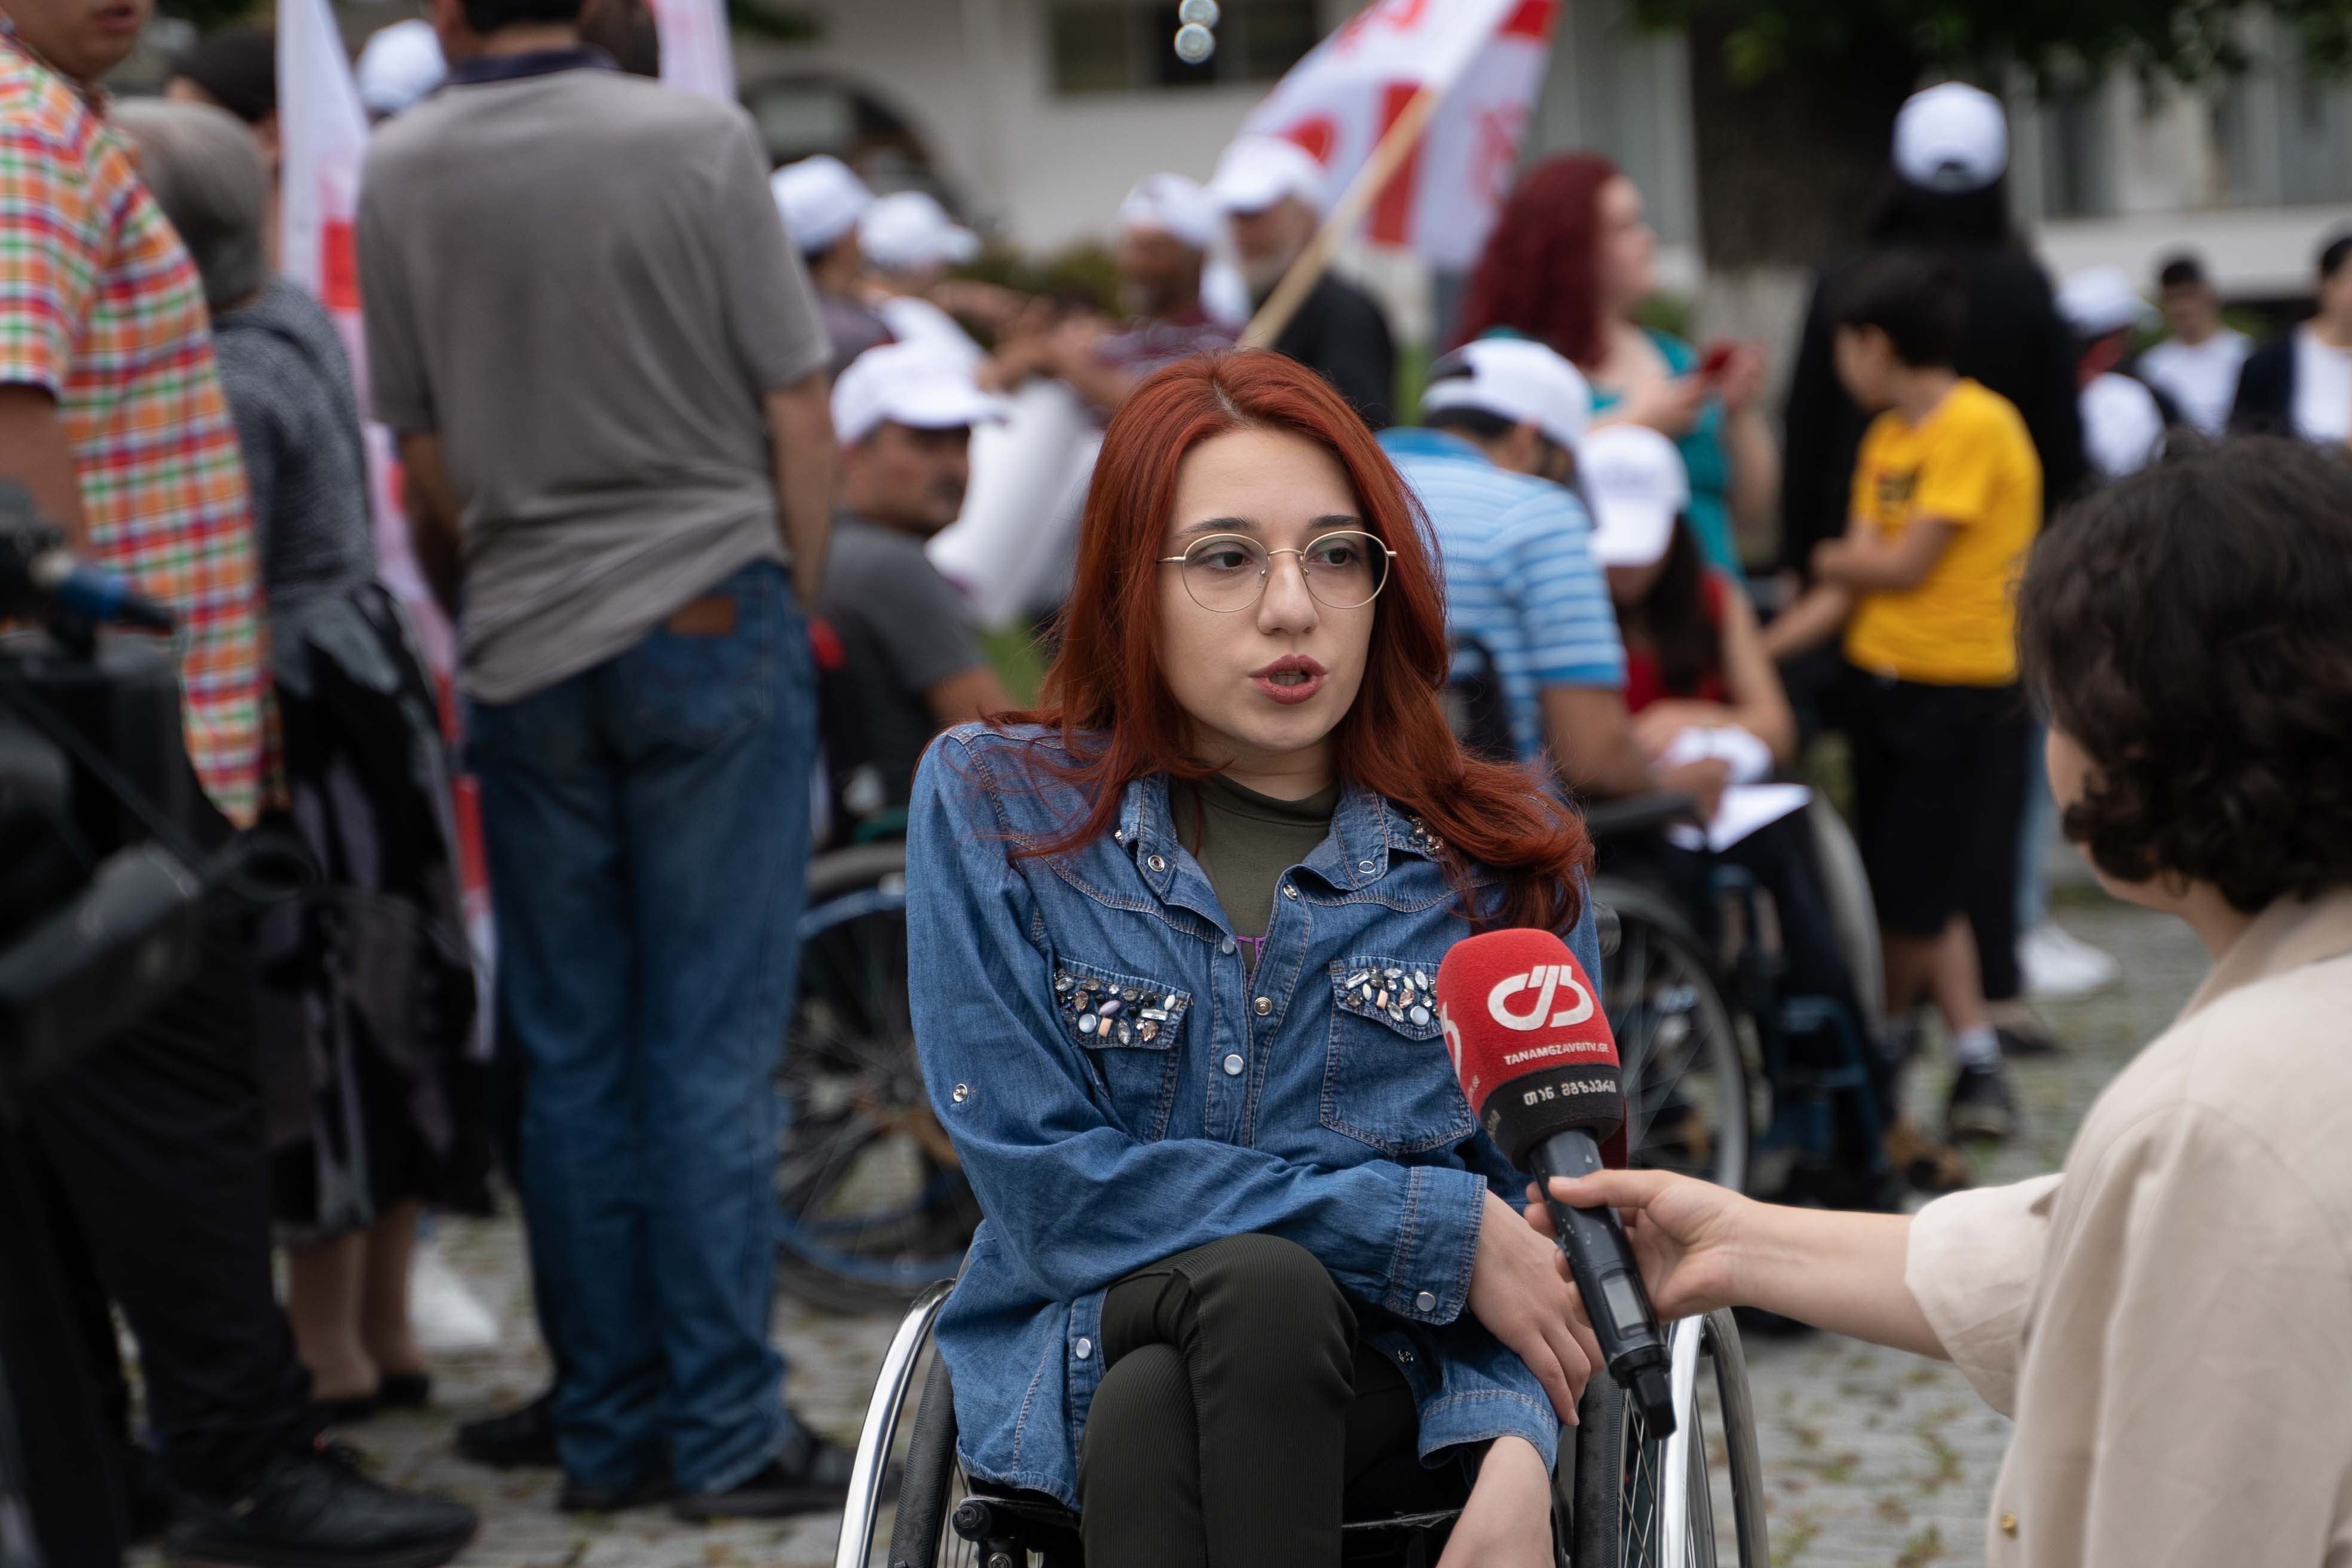 A MARCH WAS HELD IN TELAVI ON THE OCCASION OF THE DAY OF PROTECTION OF THE RIGHTS OF PERSONS WITH DISABILITIES